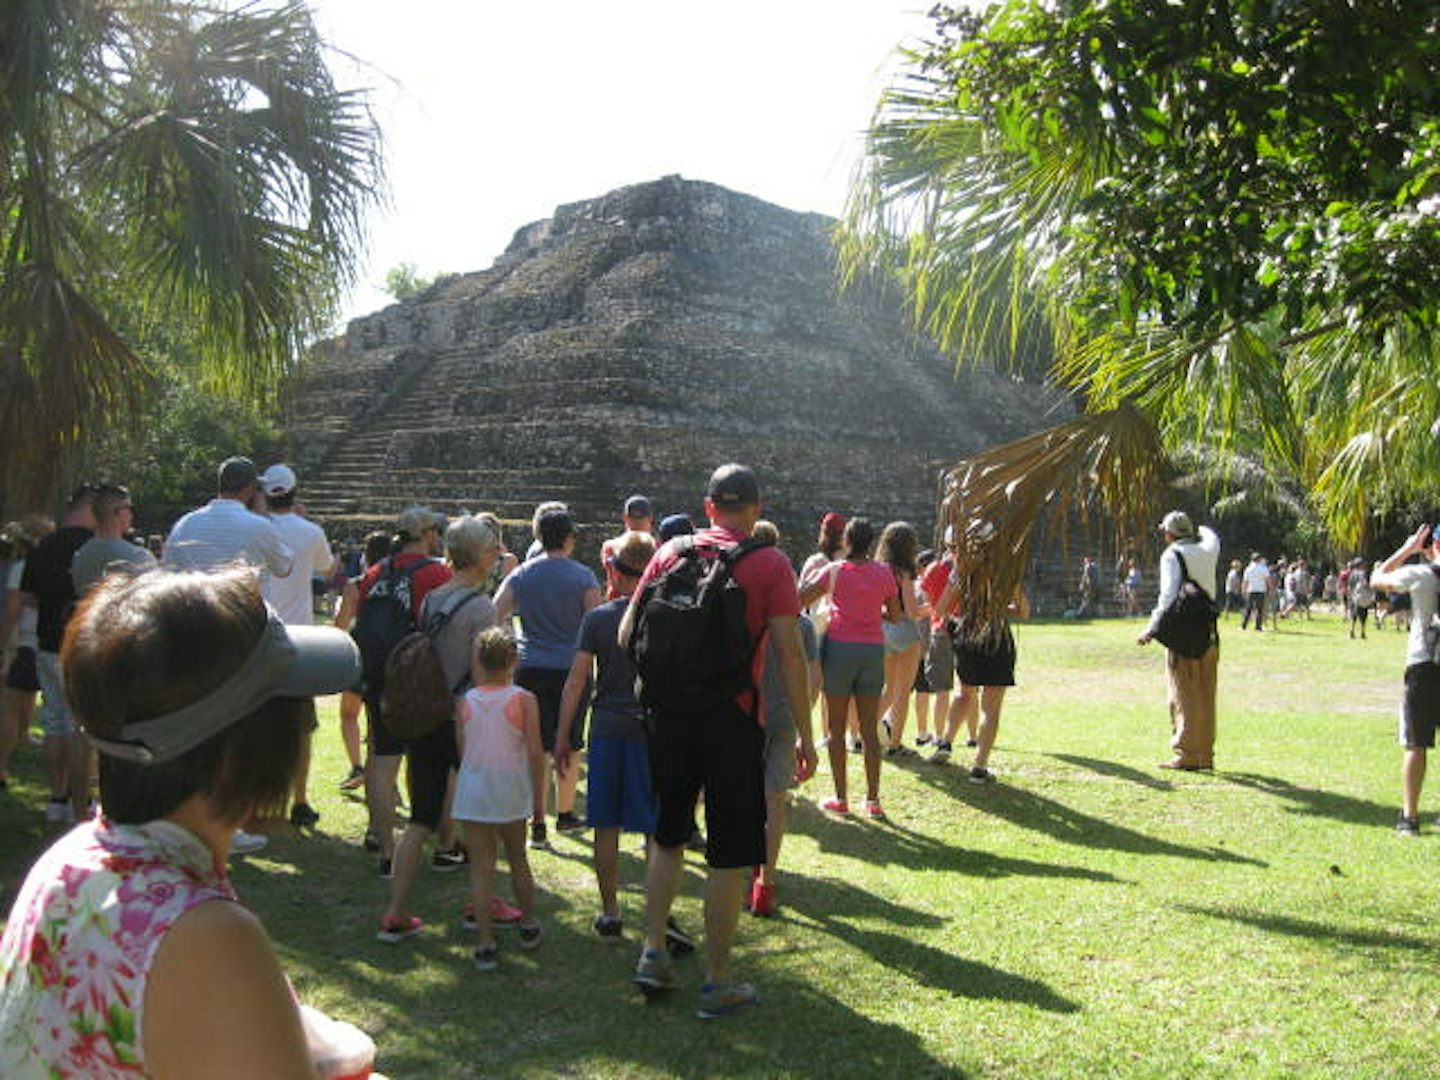 the great pyramid of Mayan ruin site Chachobaan, swarming with tourists in